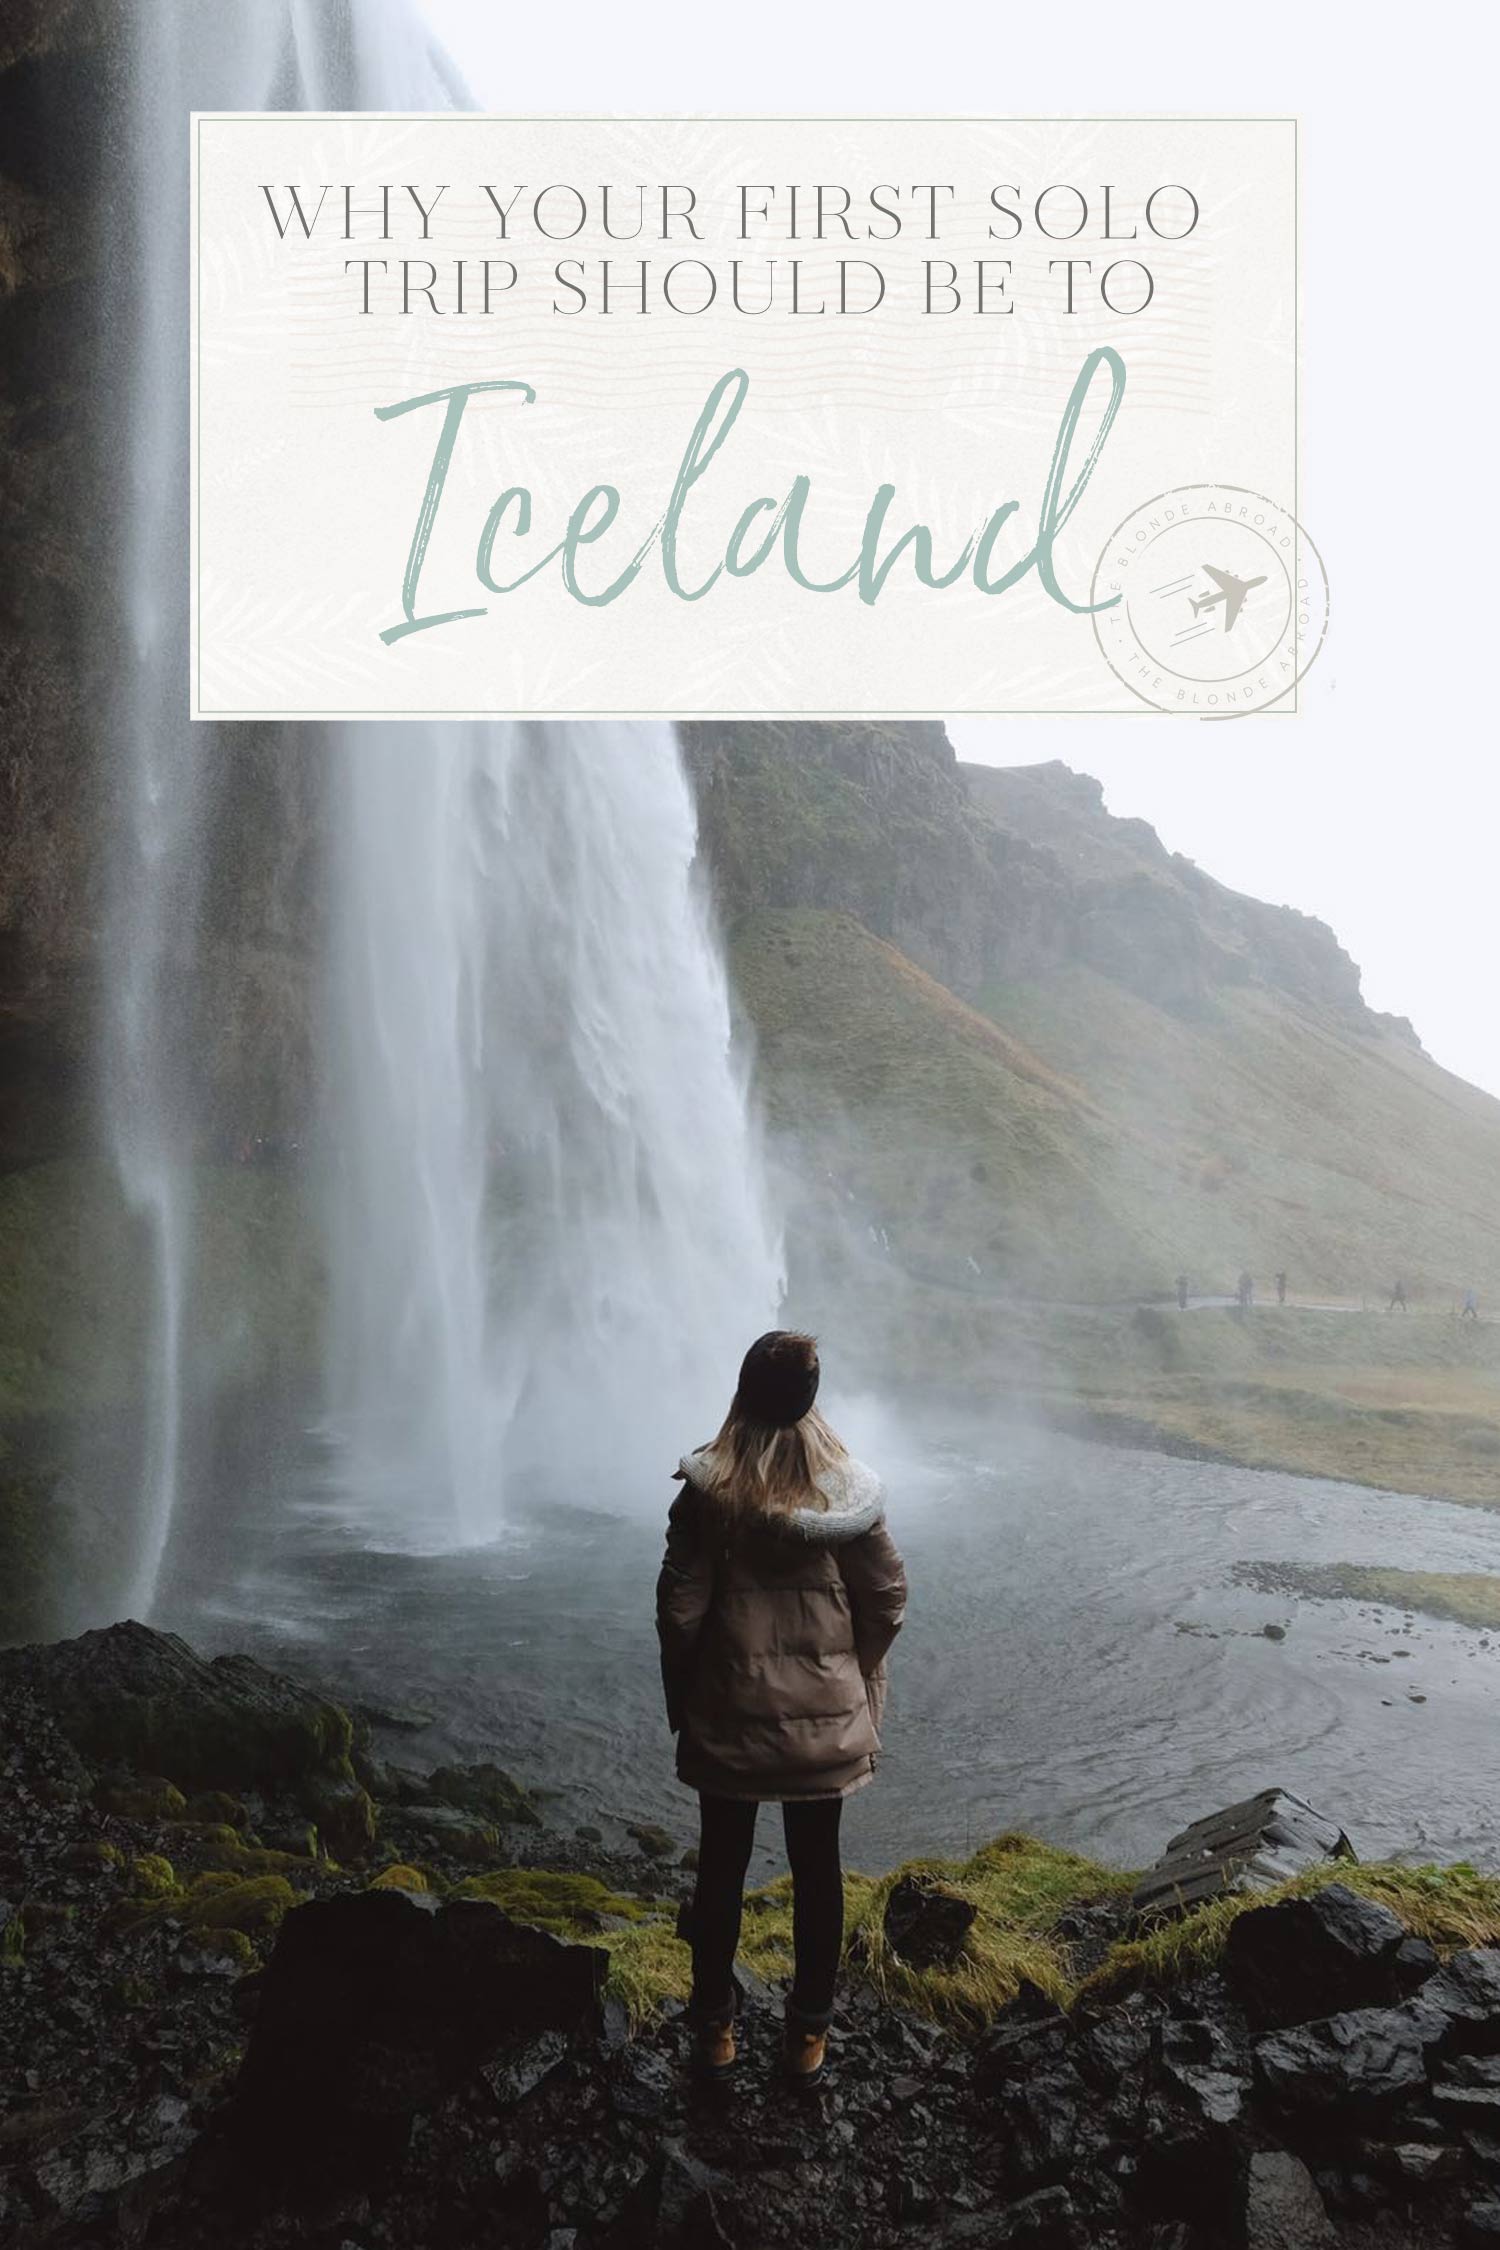 iceland solo trip from india